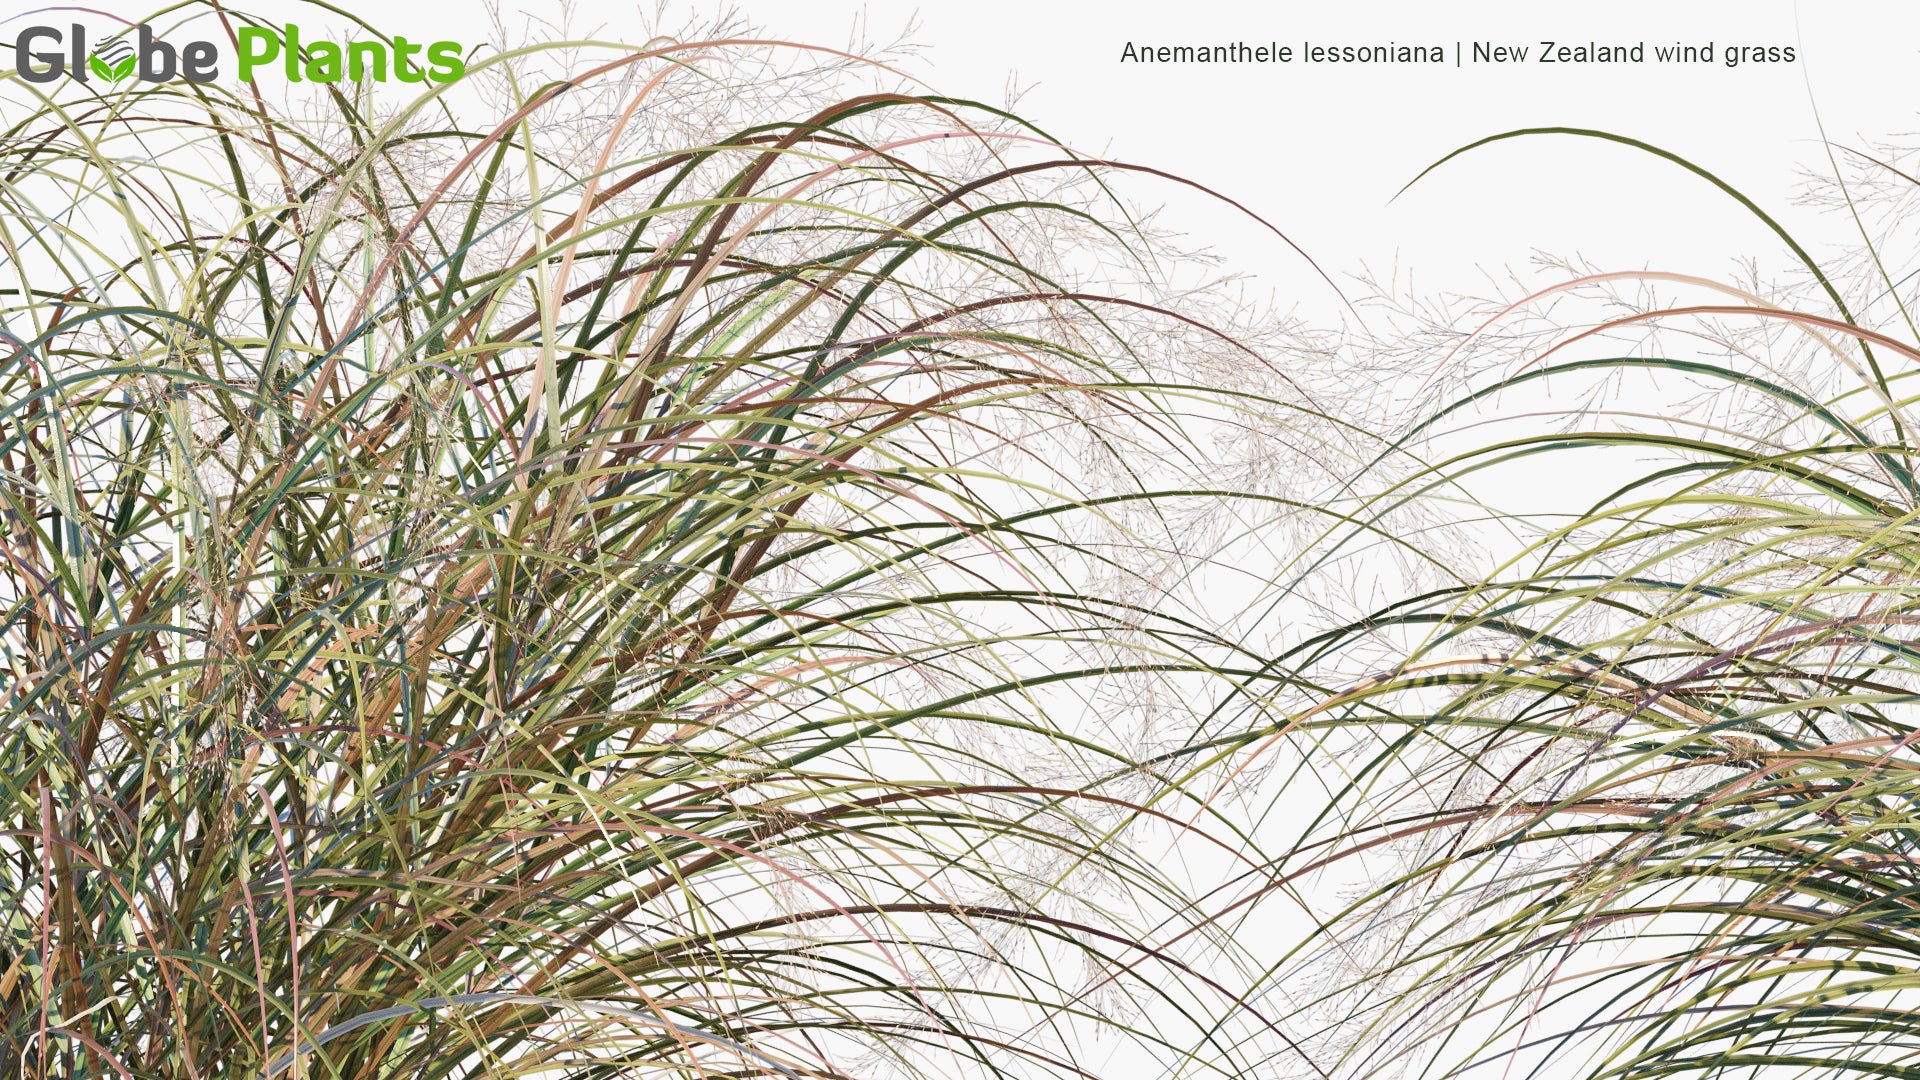 Low Poly Anemanthele Lessoniana - New Zealand Wind Grass, Gossamer Grass, Pheasant's Tail Grass (3D Model)